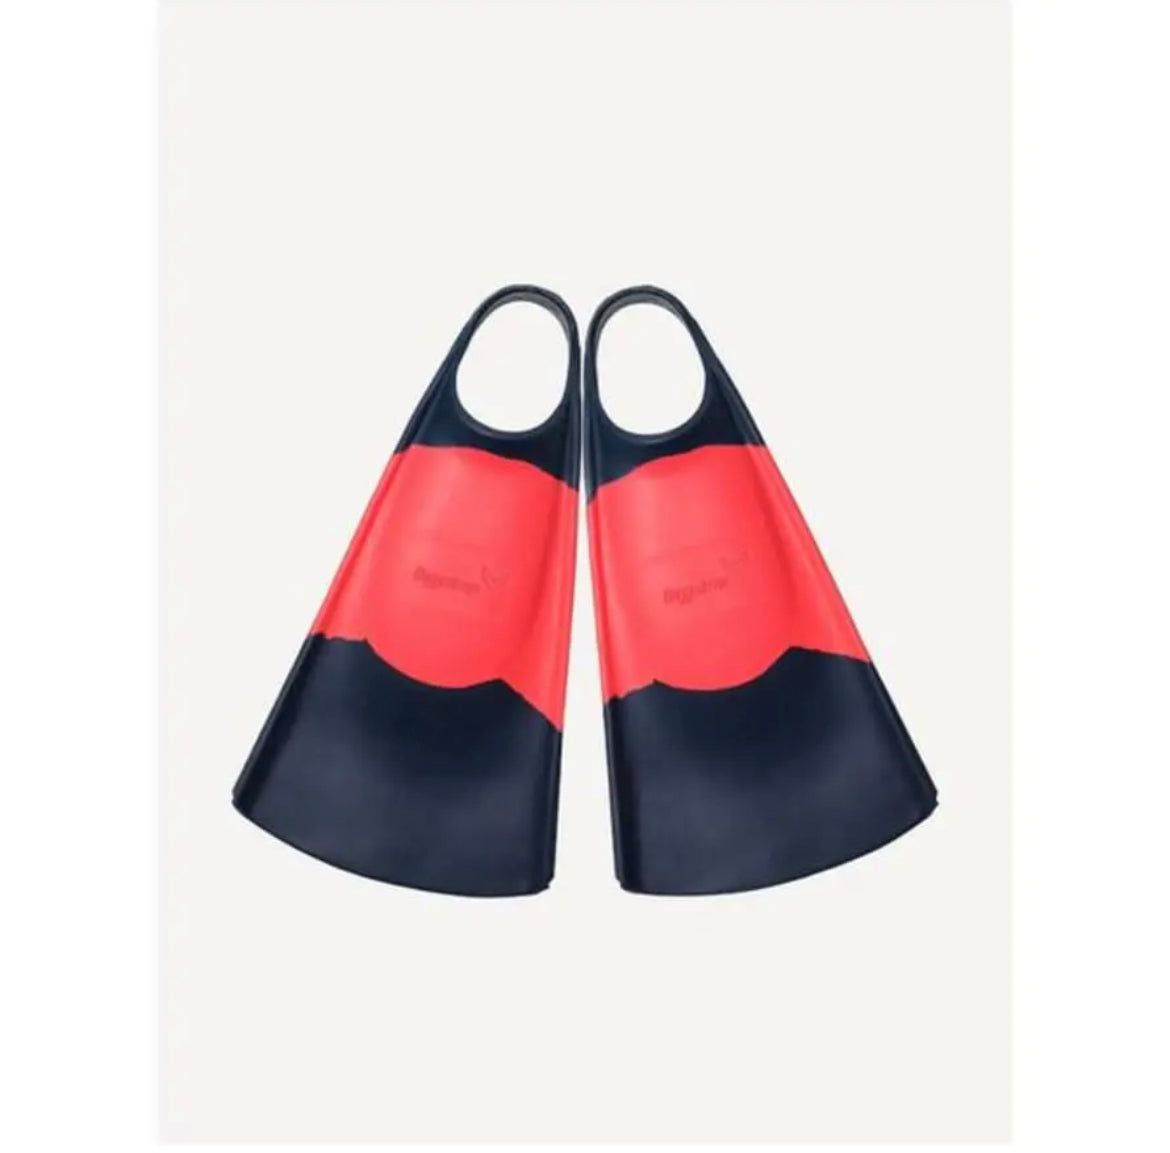 Hydro O.G. Fins (Navy/Coral)